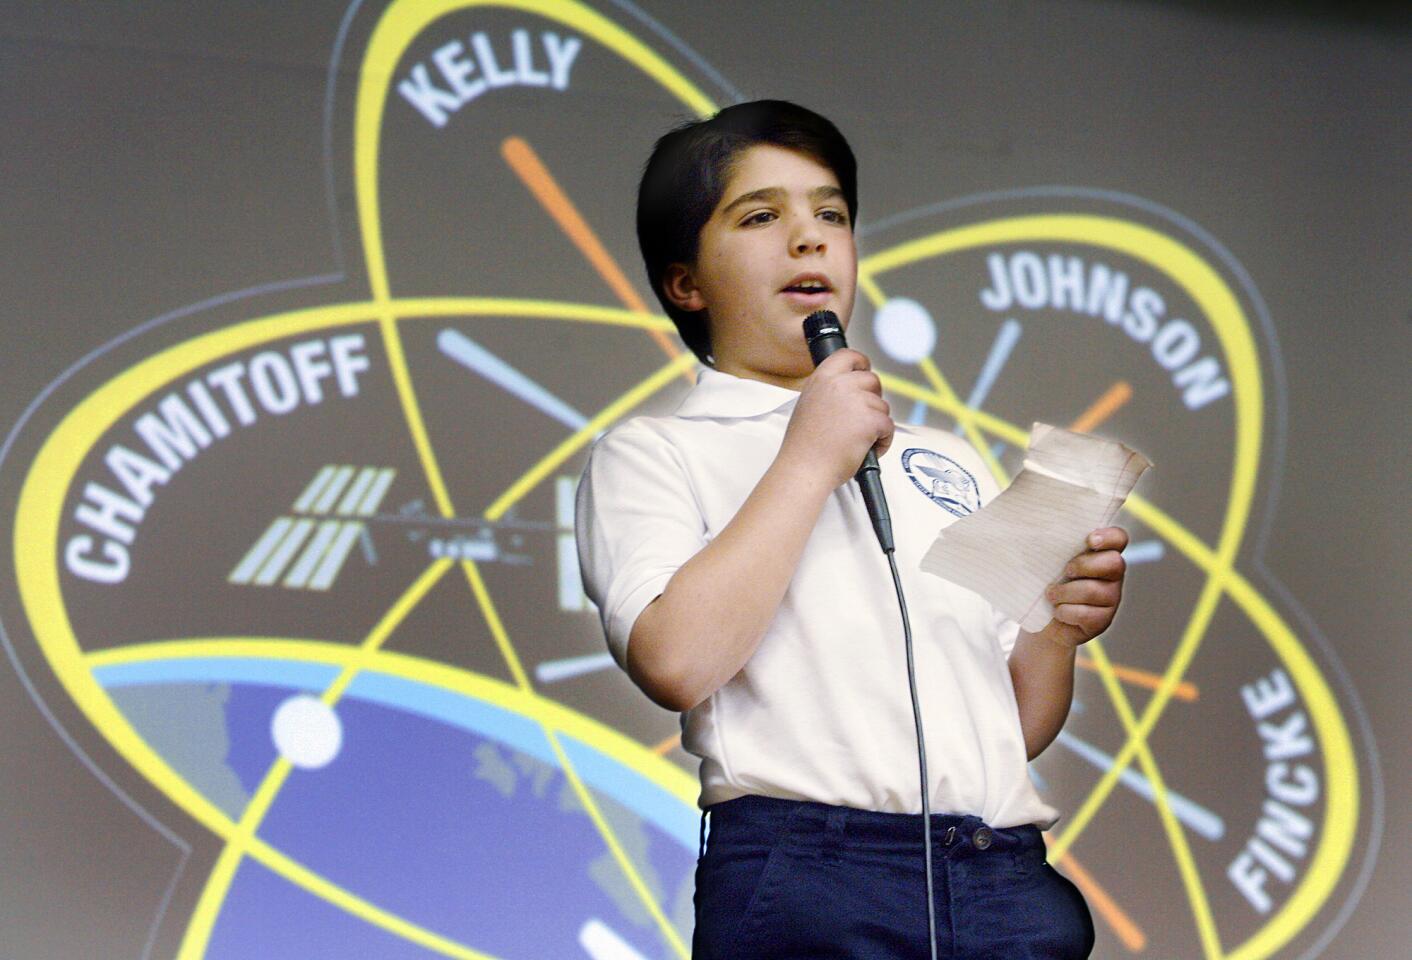 Fourth grade student Shant Armenian, 9, of Altadena, talks to his fellow students about bringing astronaut Gregory Errol Chamitoff to Vahan & Anoush Chamlian Armenian School in Glendale on Friday, January 13, 2012 to talk to the students. Armenian is a member of the Astronomy Club in Burbank who sent a letter to U.S. Congressman Adam Schiff asking if an astronaut could visit the school. Astronaut Gregory Errol Chamitoff, who was part of Space Shuttle mission STS 134 visited and told students about the mission.